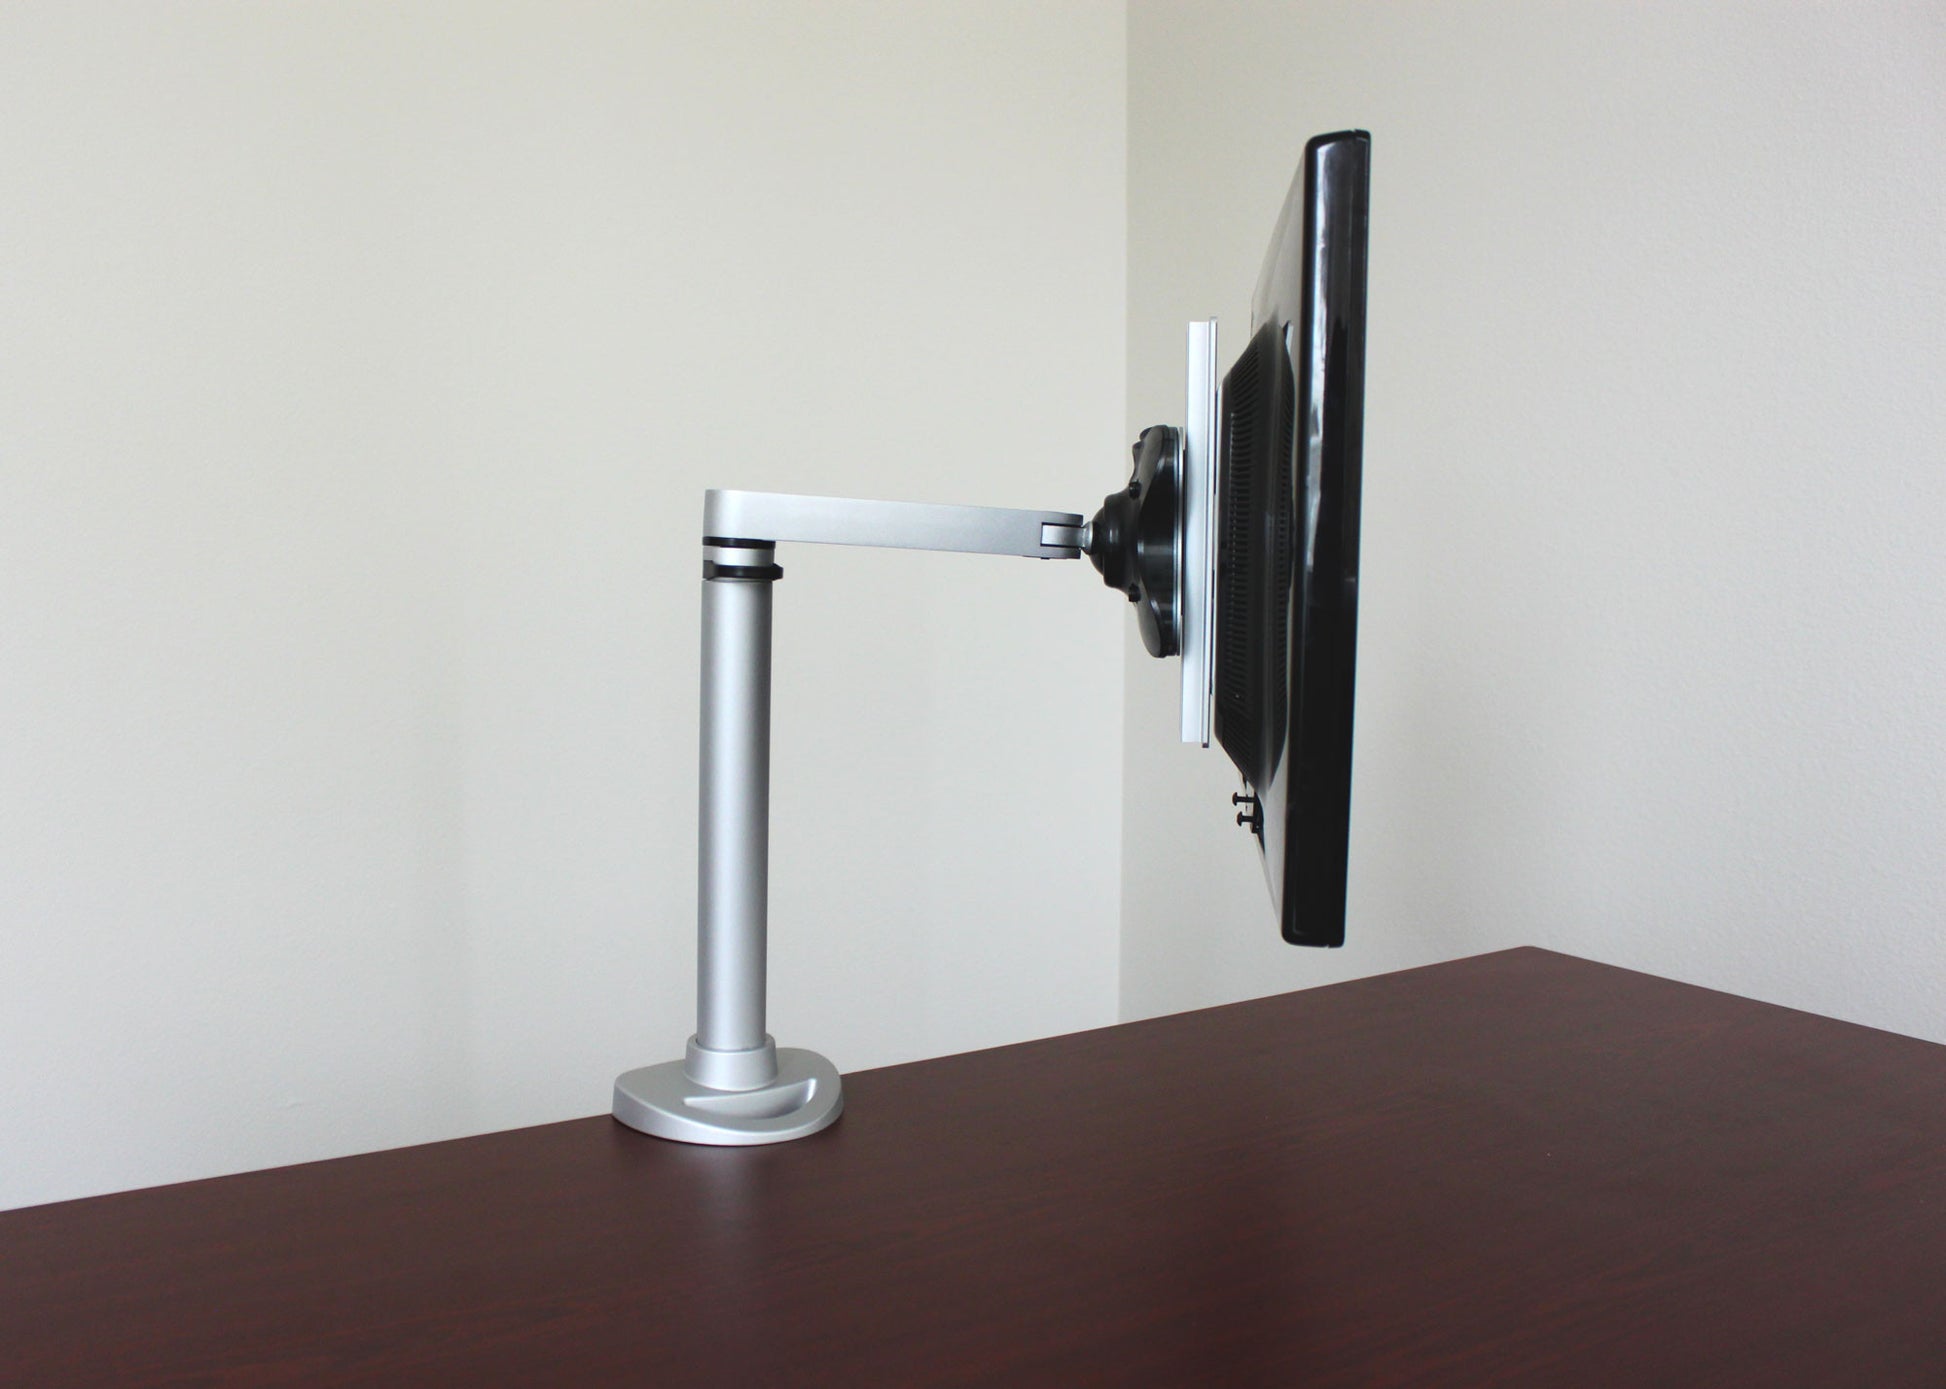 EasyFly Single Monitor Arm with Monitor on it